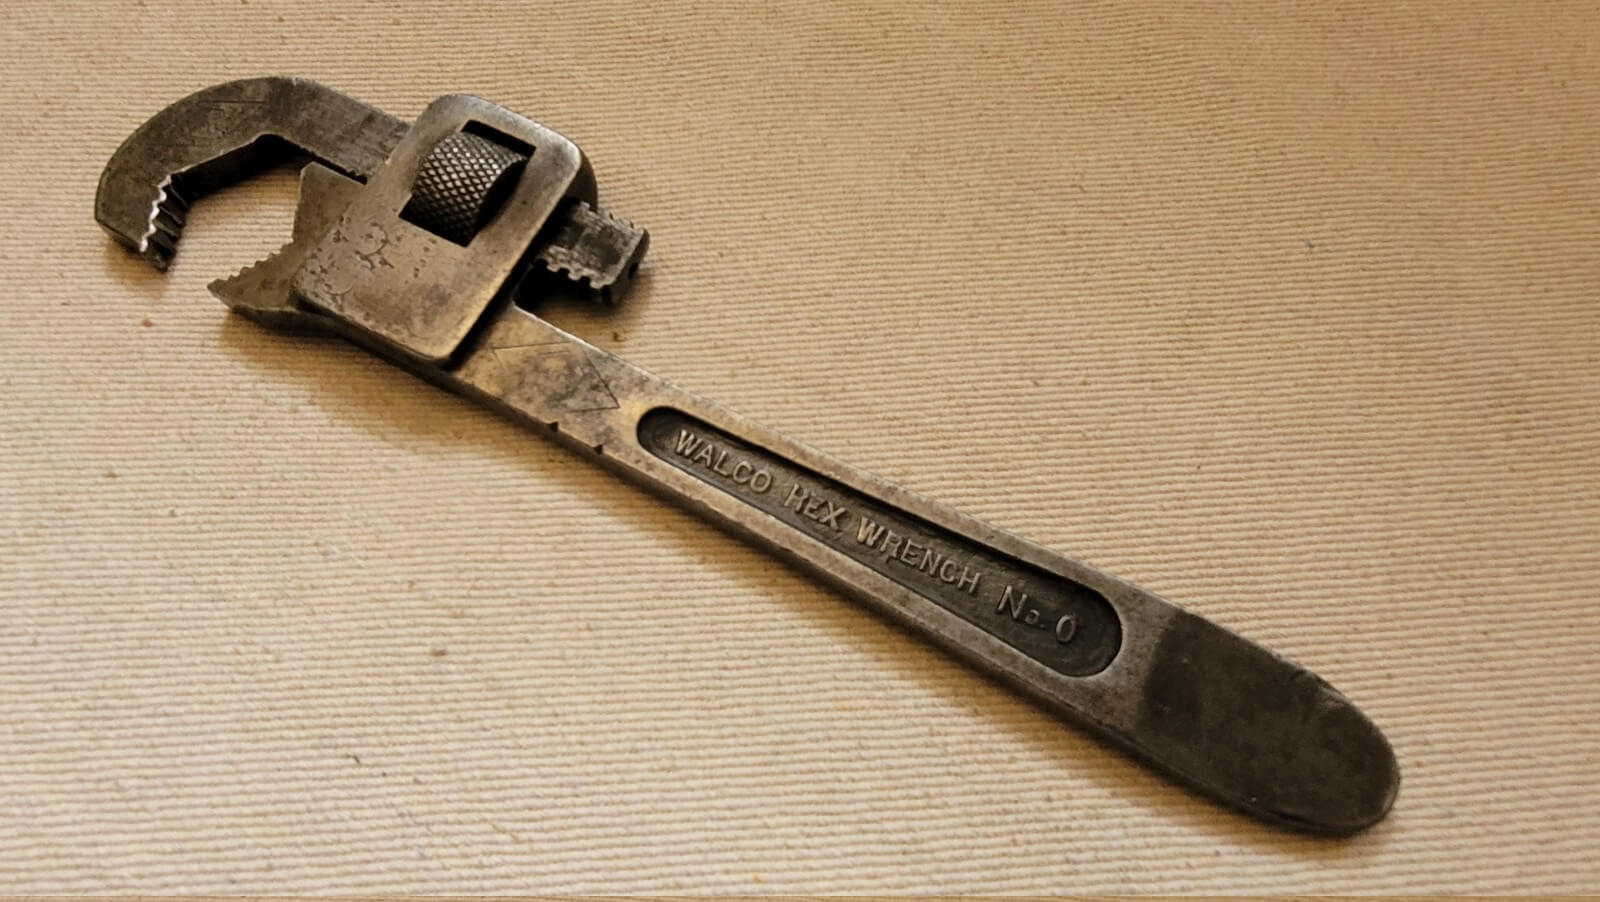 Rare Walco Hex Pie Adjustable Wrench No. 0 Walworth Mfg Co, Boston Mass - Antique and Vintage made in USA Hand Tools